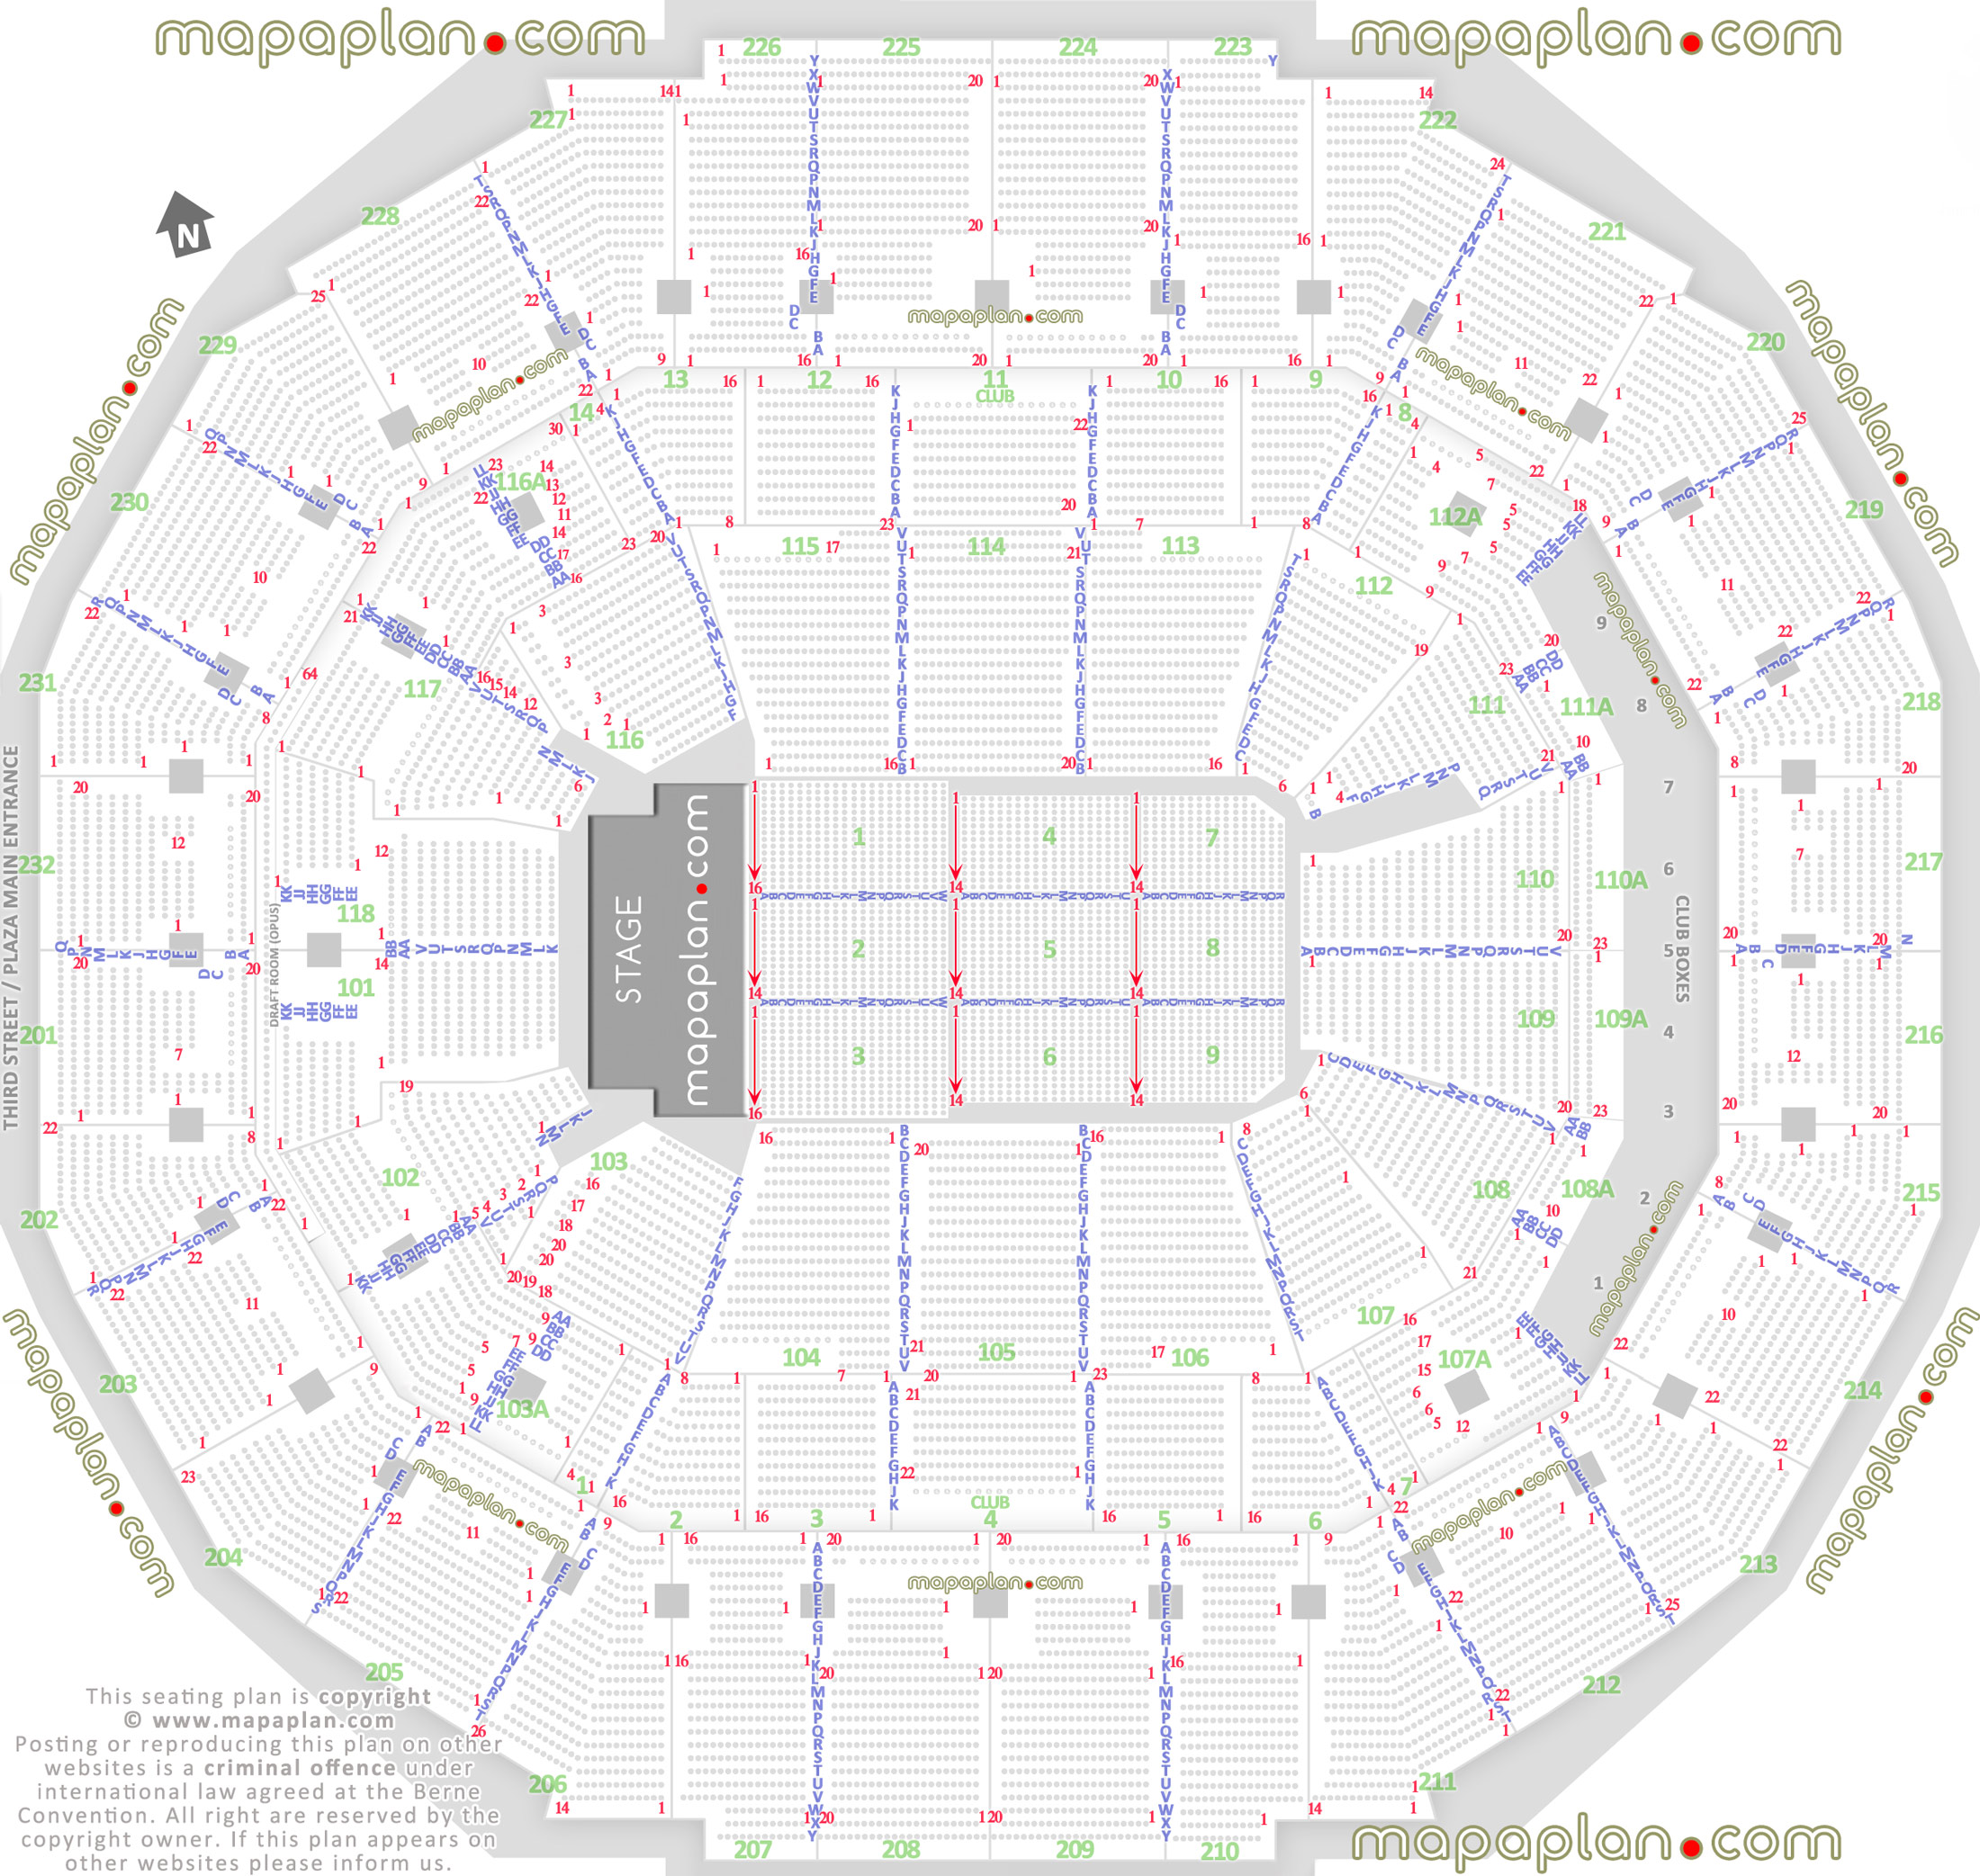 Fedexforum Seating Chart With Seat Numbers